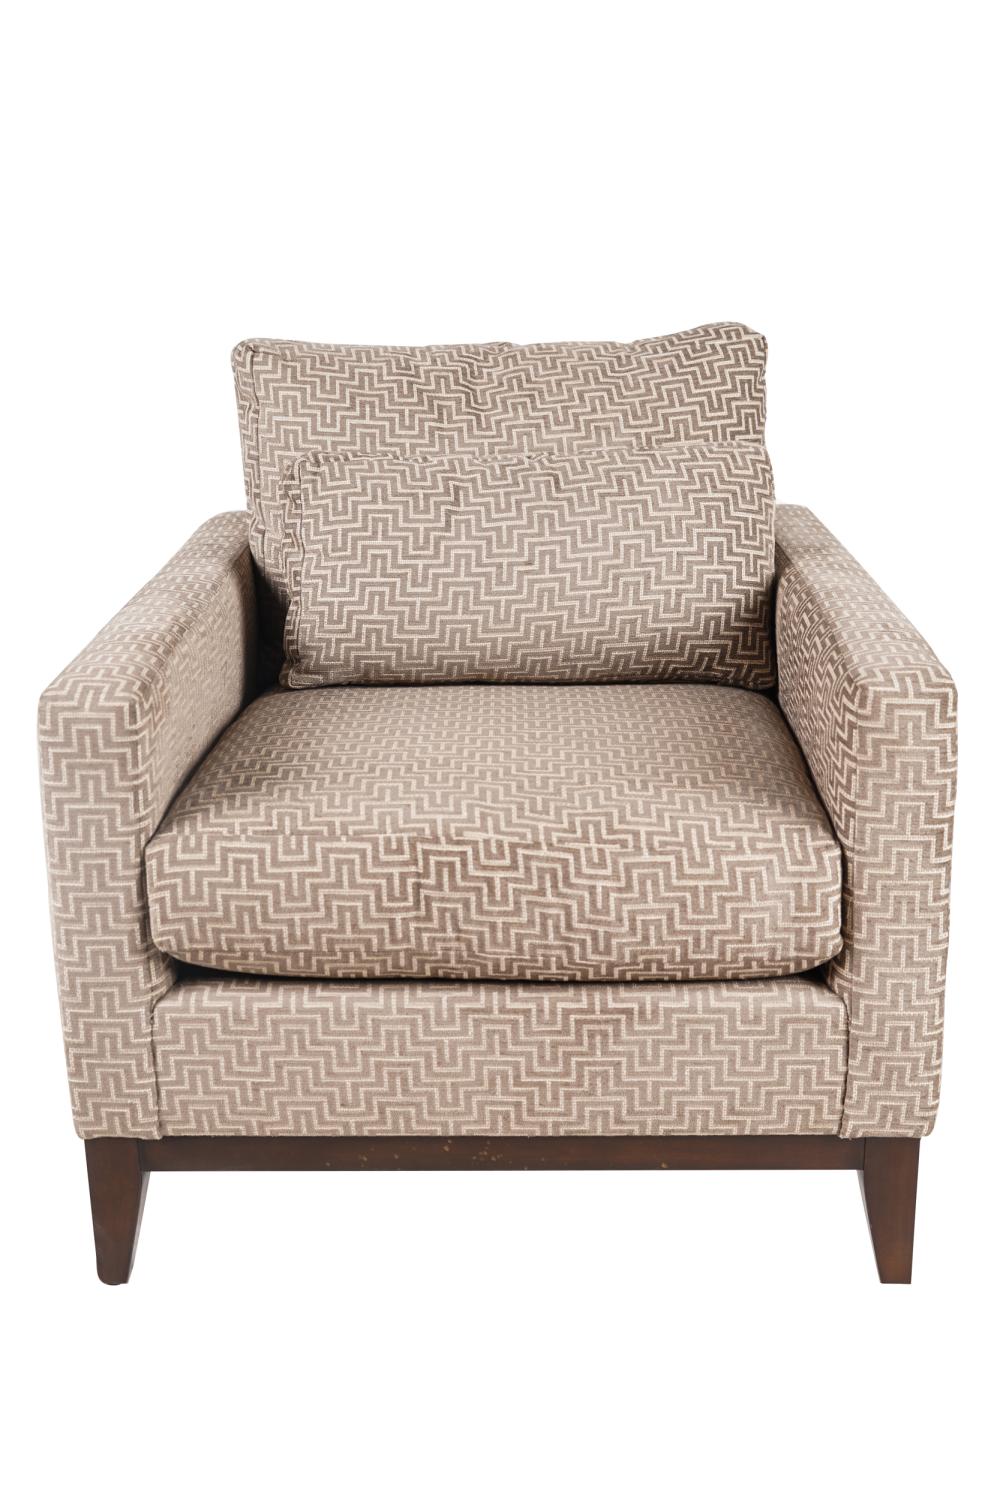 CONTEMPORARY UPHOLSTERED CLUB CHAIRgeometric 332c63